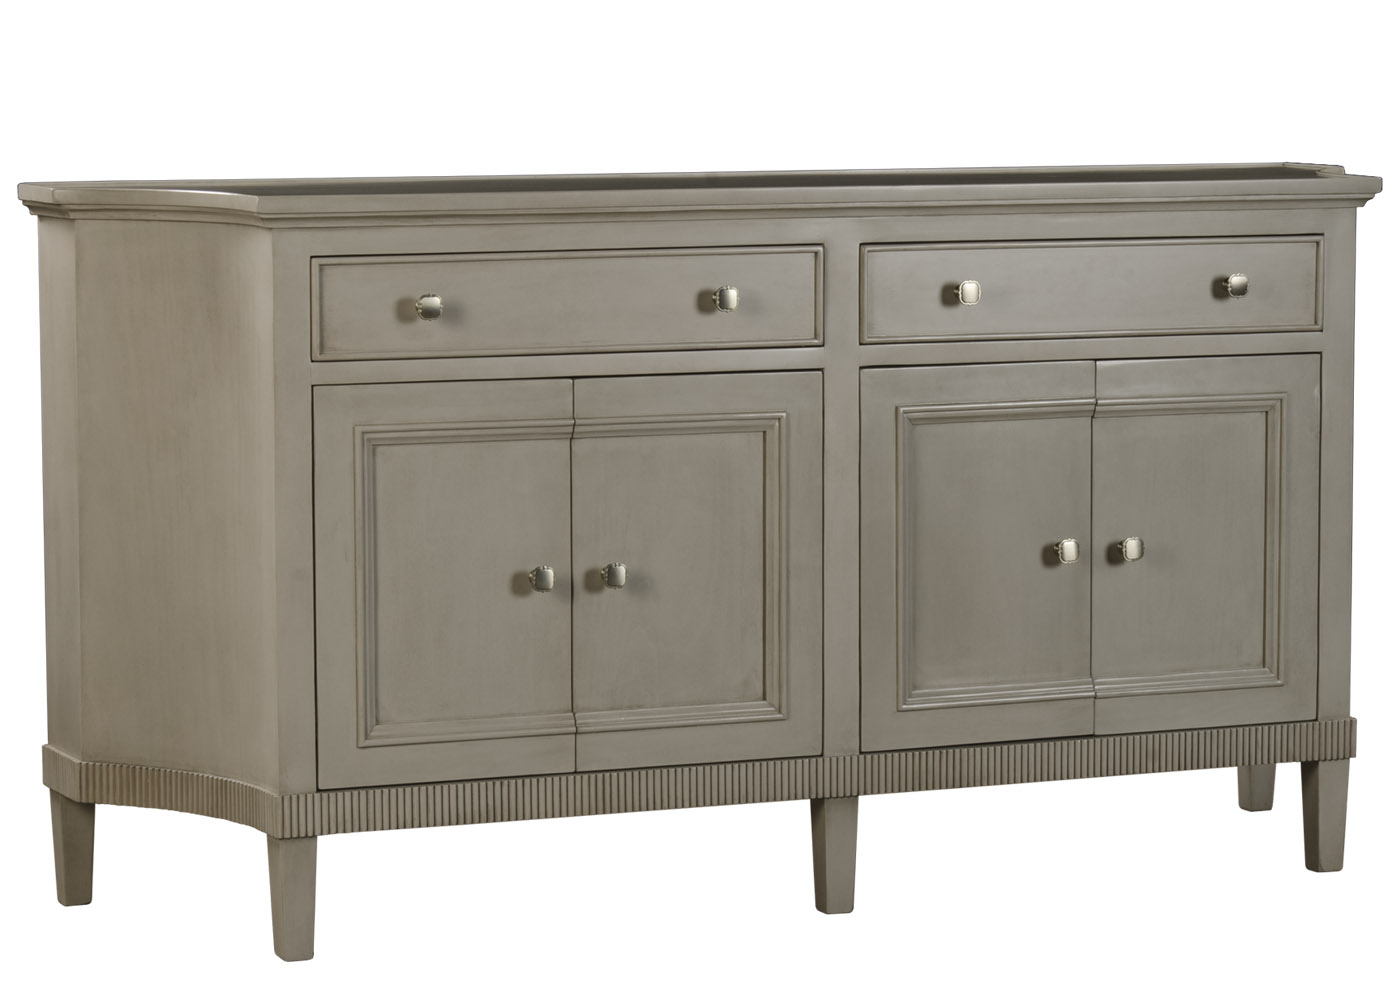 Whitacre transitional curved corner cabinet buffet by Woodland furniture and cabinetry in Idaho Falls